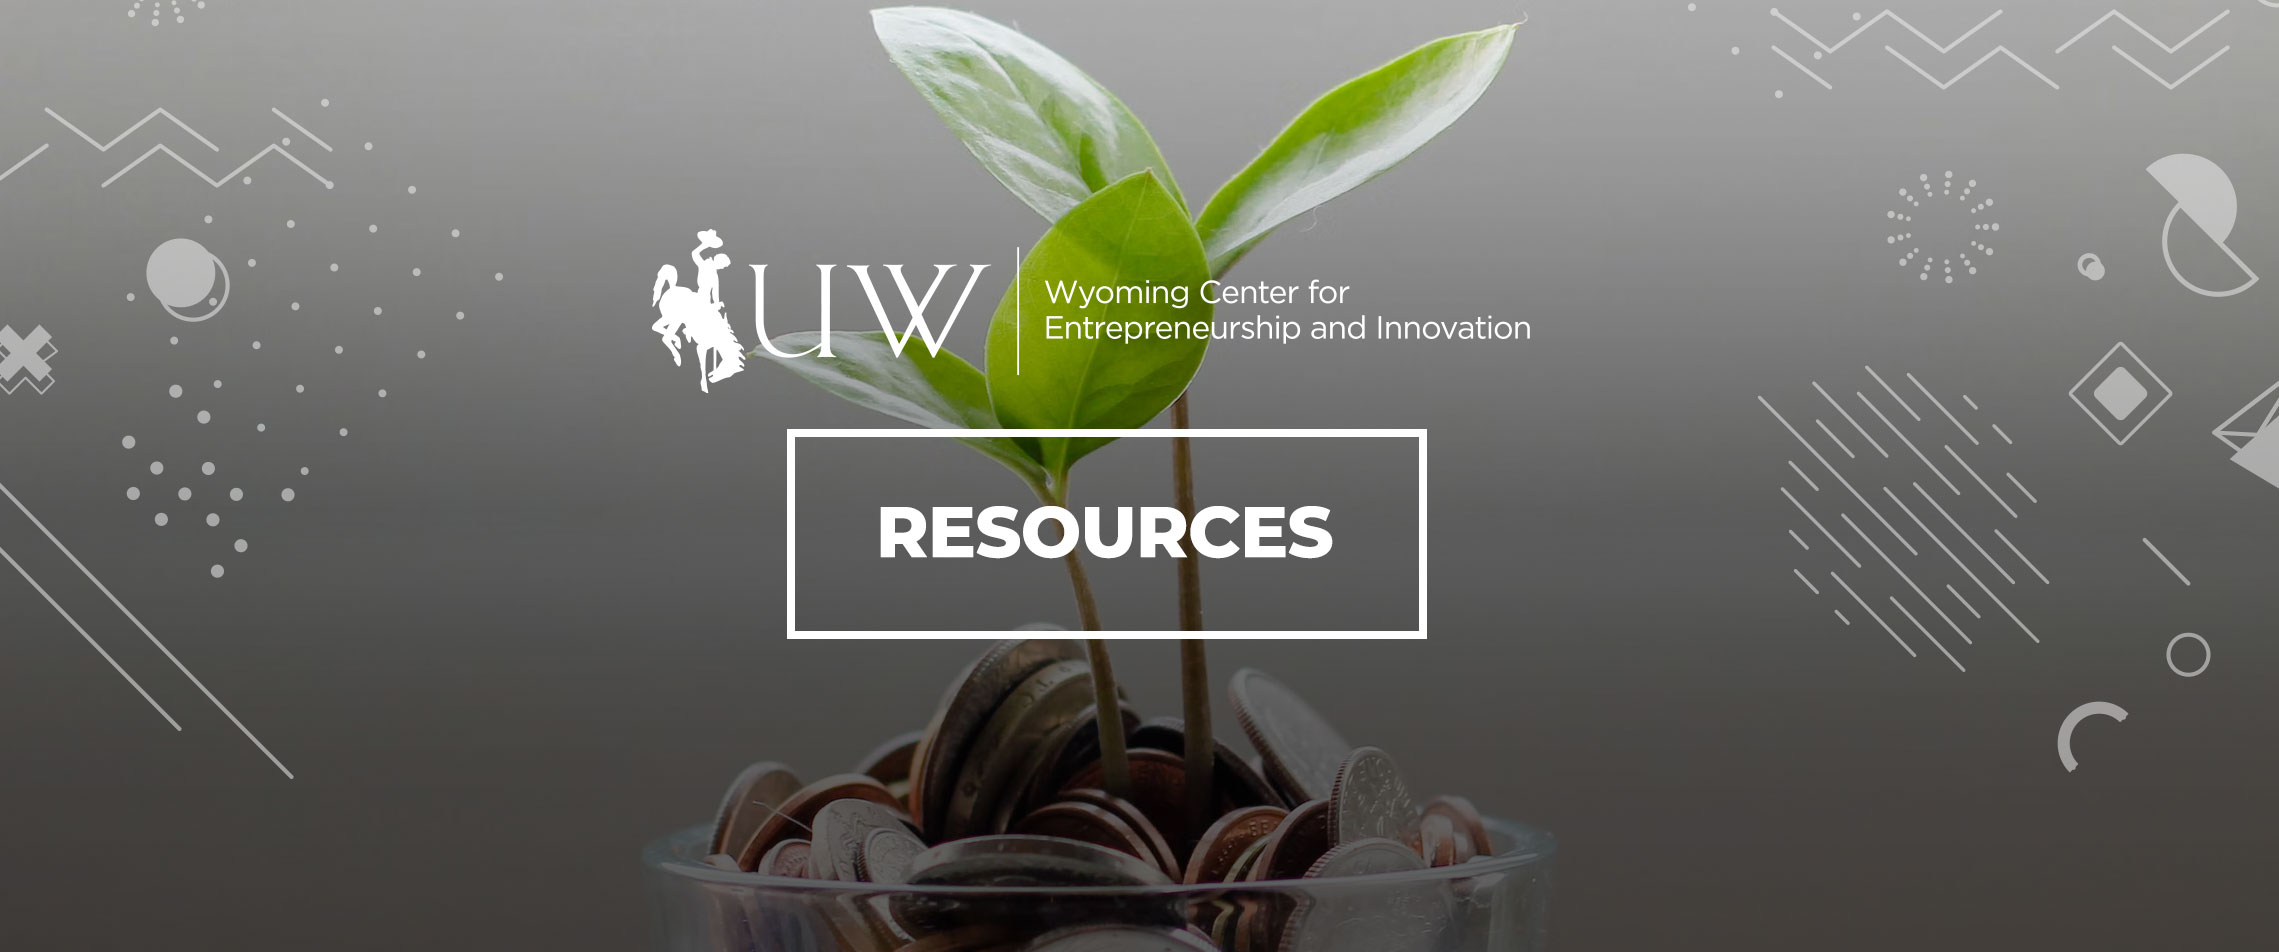 Plant with Resources and University of Wyoming Center for Entrepreneurship & Innovation logo